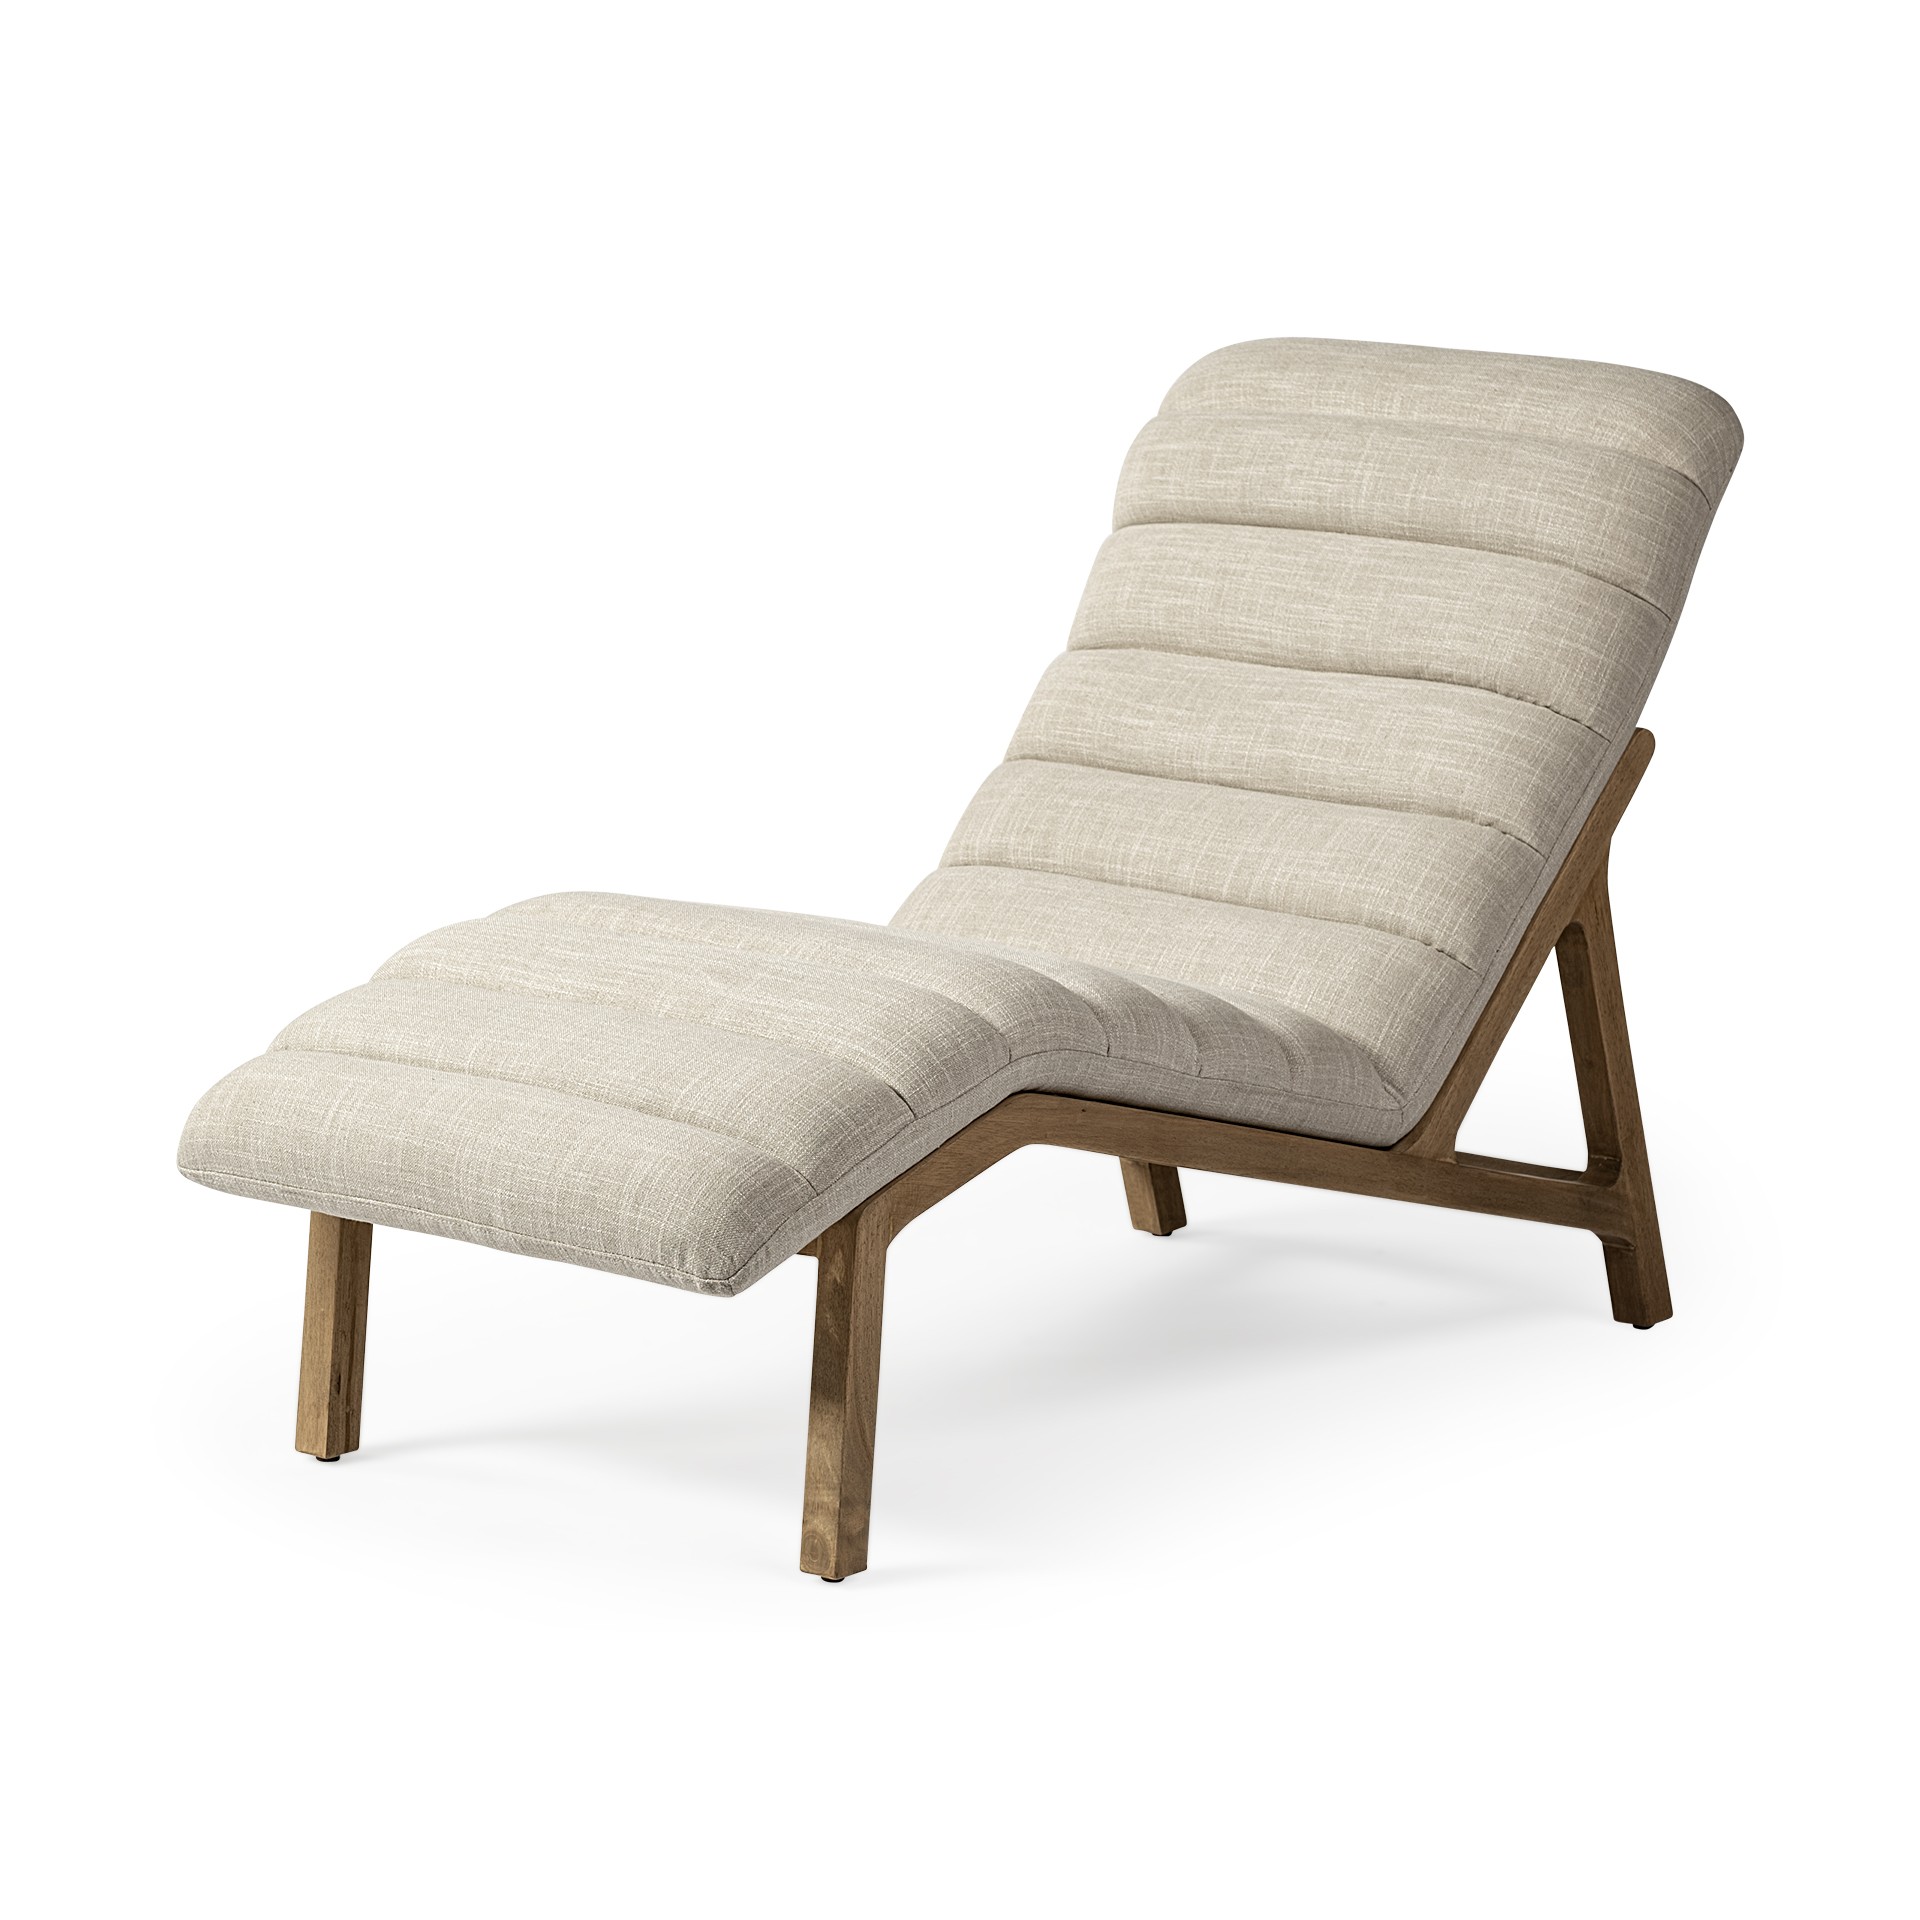 Modern Cream Fabric Upholstered Chaise Lounge Chair With Solid Wood Frame And Base